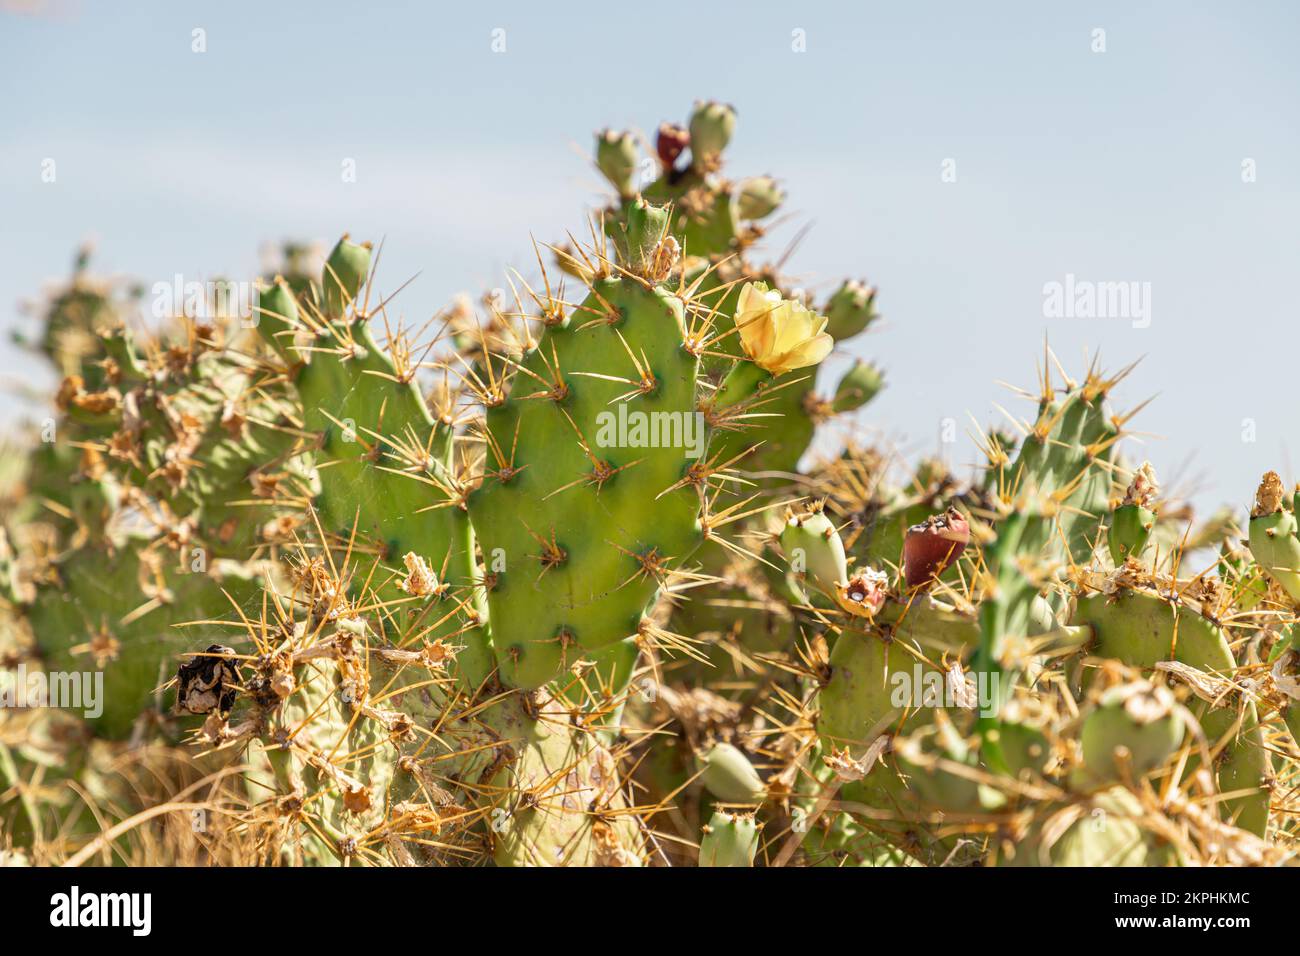 Cactus Opuntia growing in Portugal Stock Photo